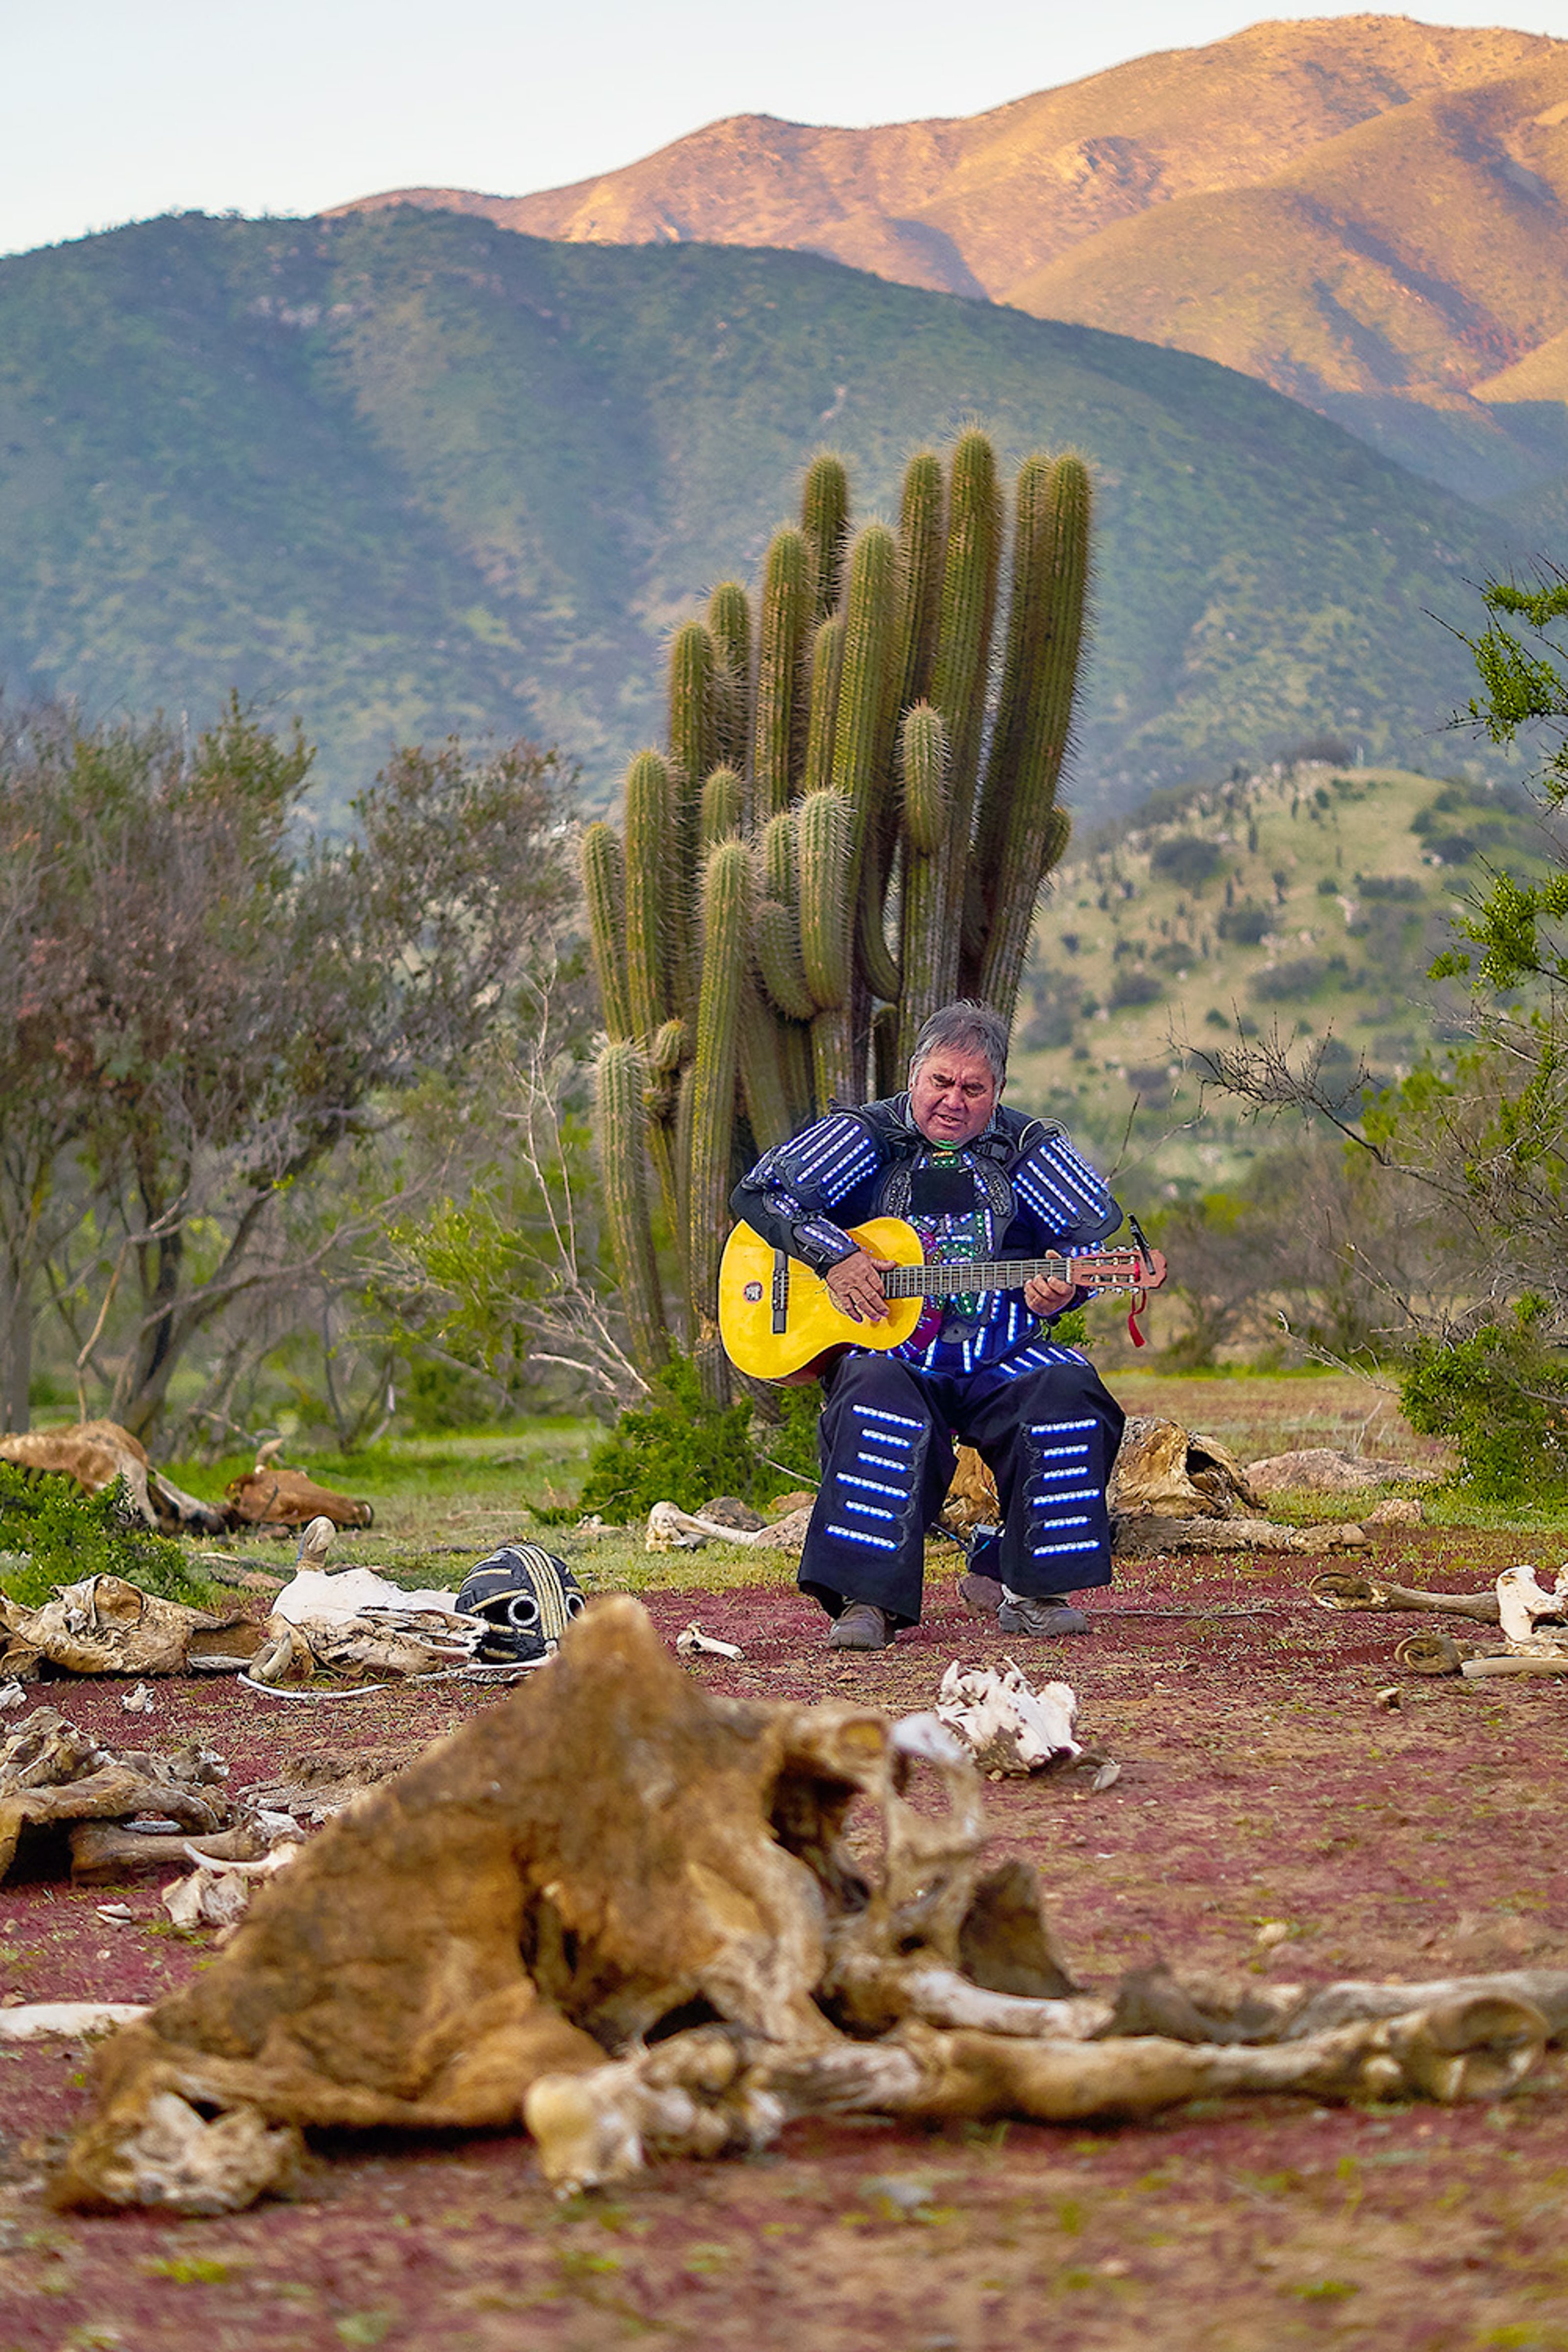 Musician Juan López playing guitar and singing, sitting under a cactus tree surrounded by by animal bones